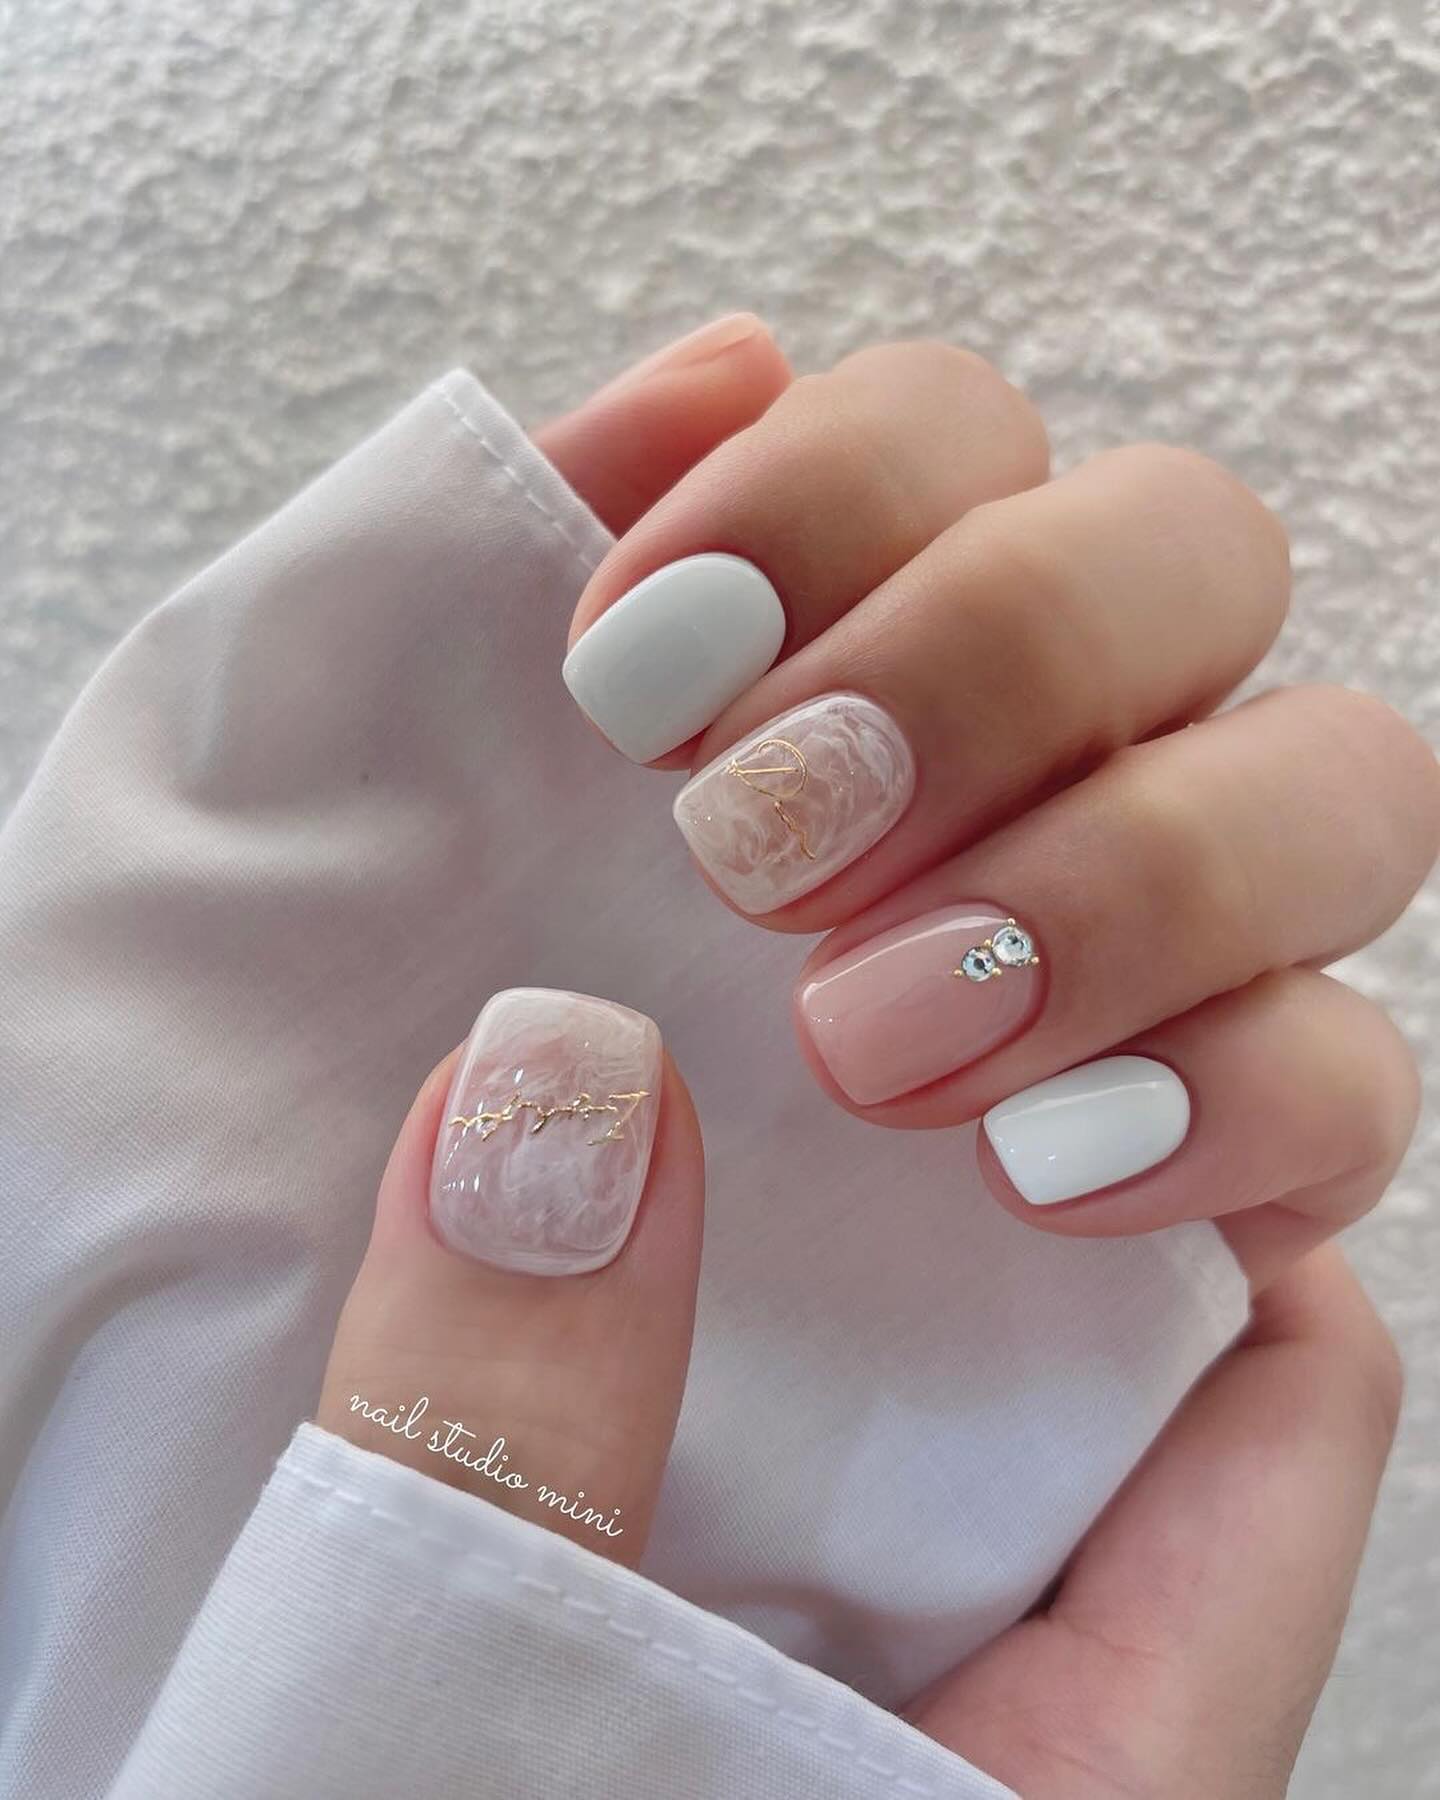 100+ Short Nail Designs You’ll Want To Try This Year images 21